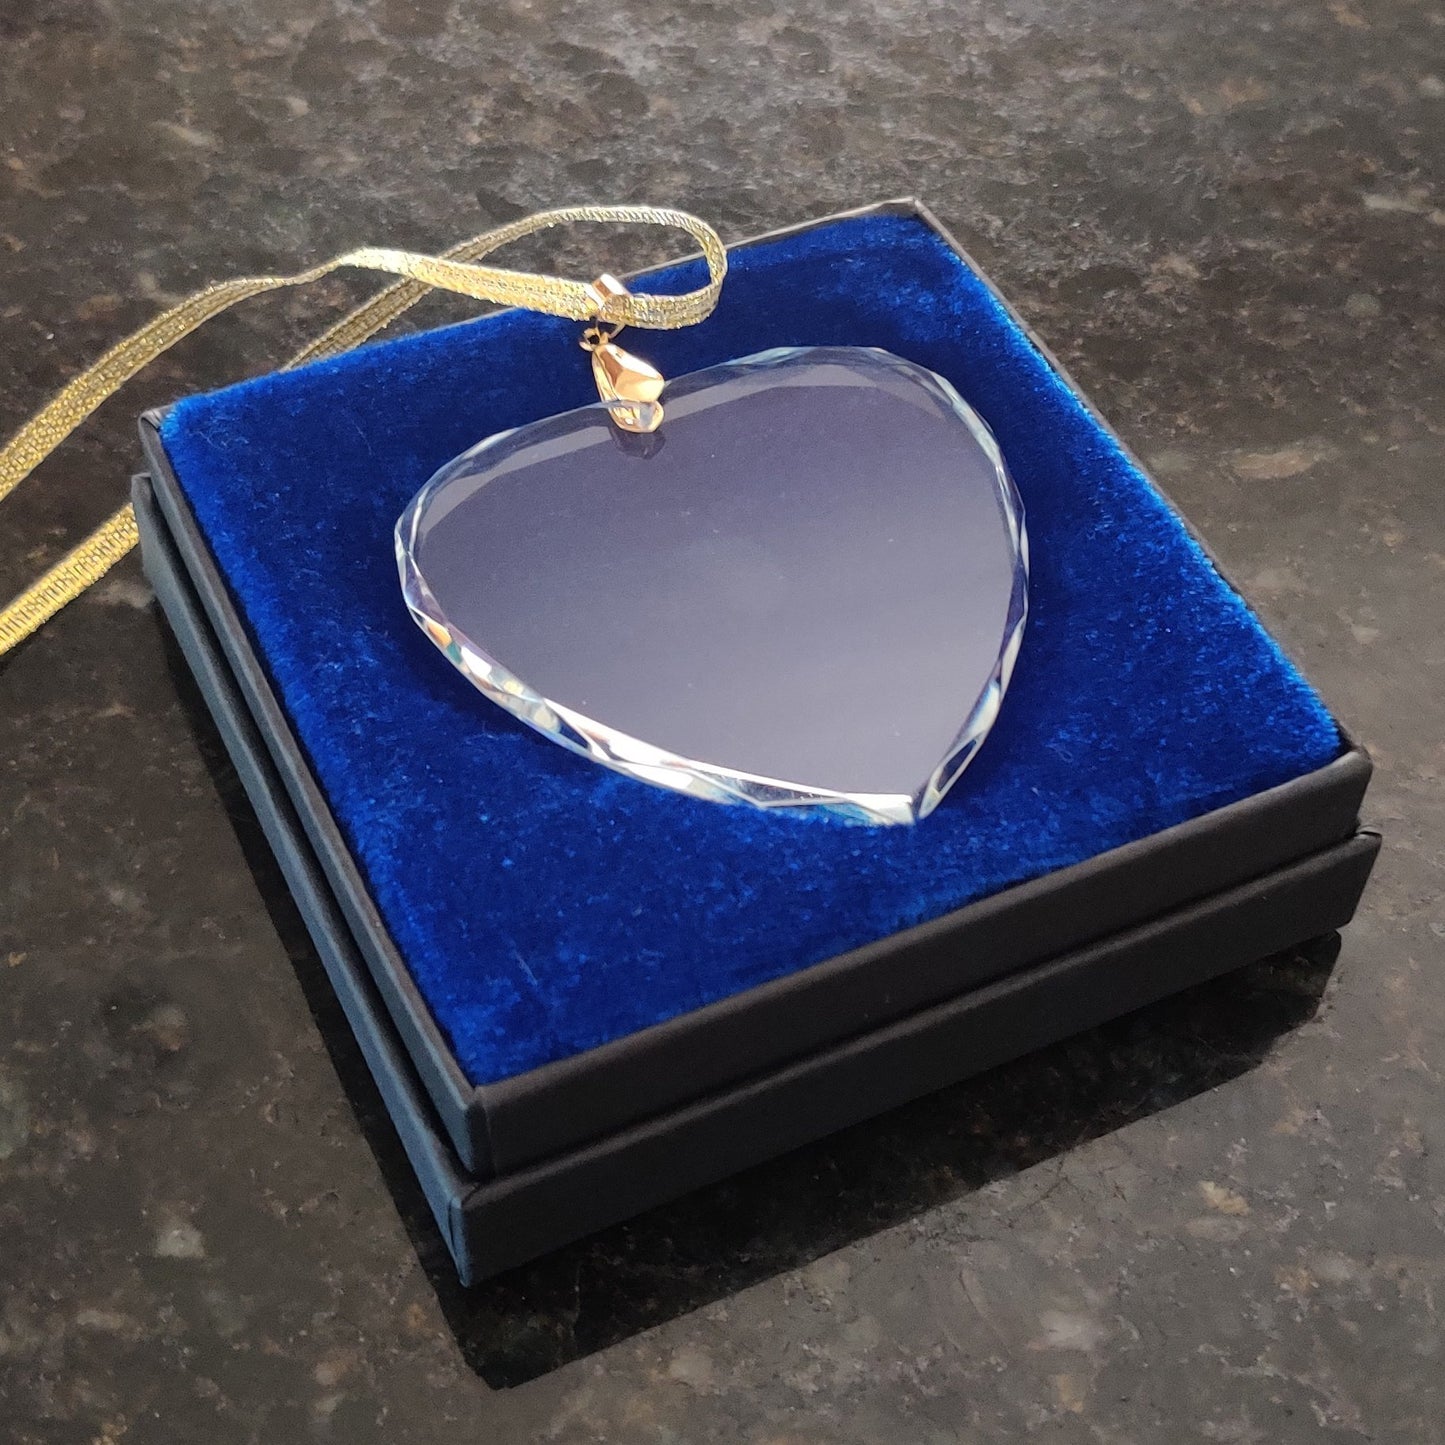 LaserGram Christmas Ornament, PA-C Certified Physician Assistant, Personalized Engraving Included (Heart Shape)